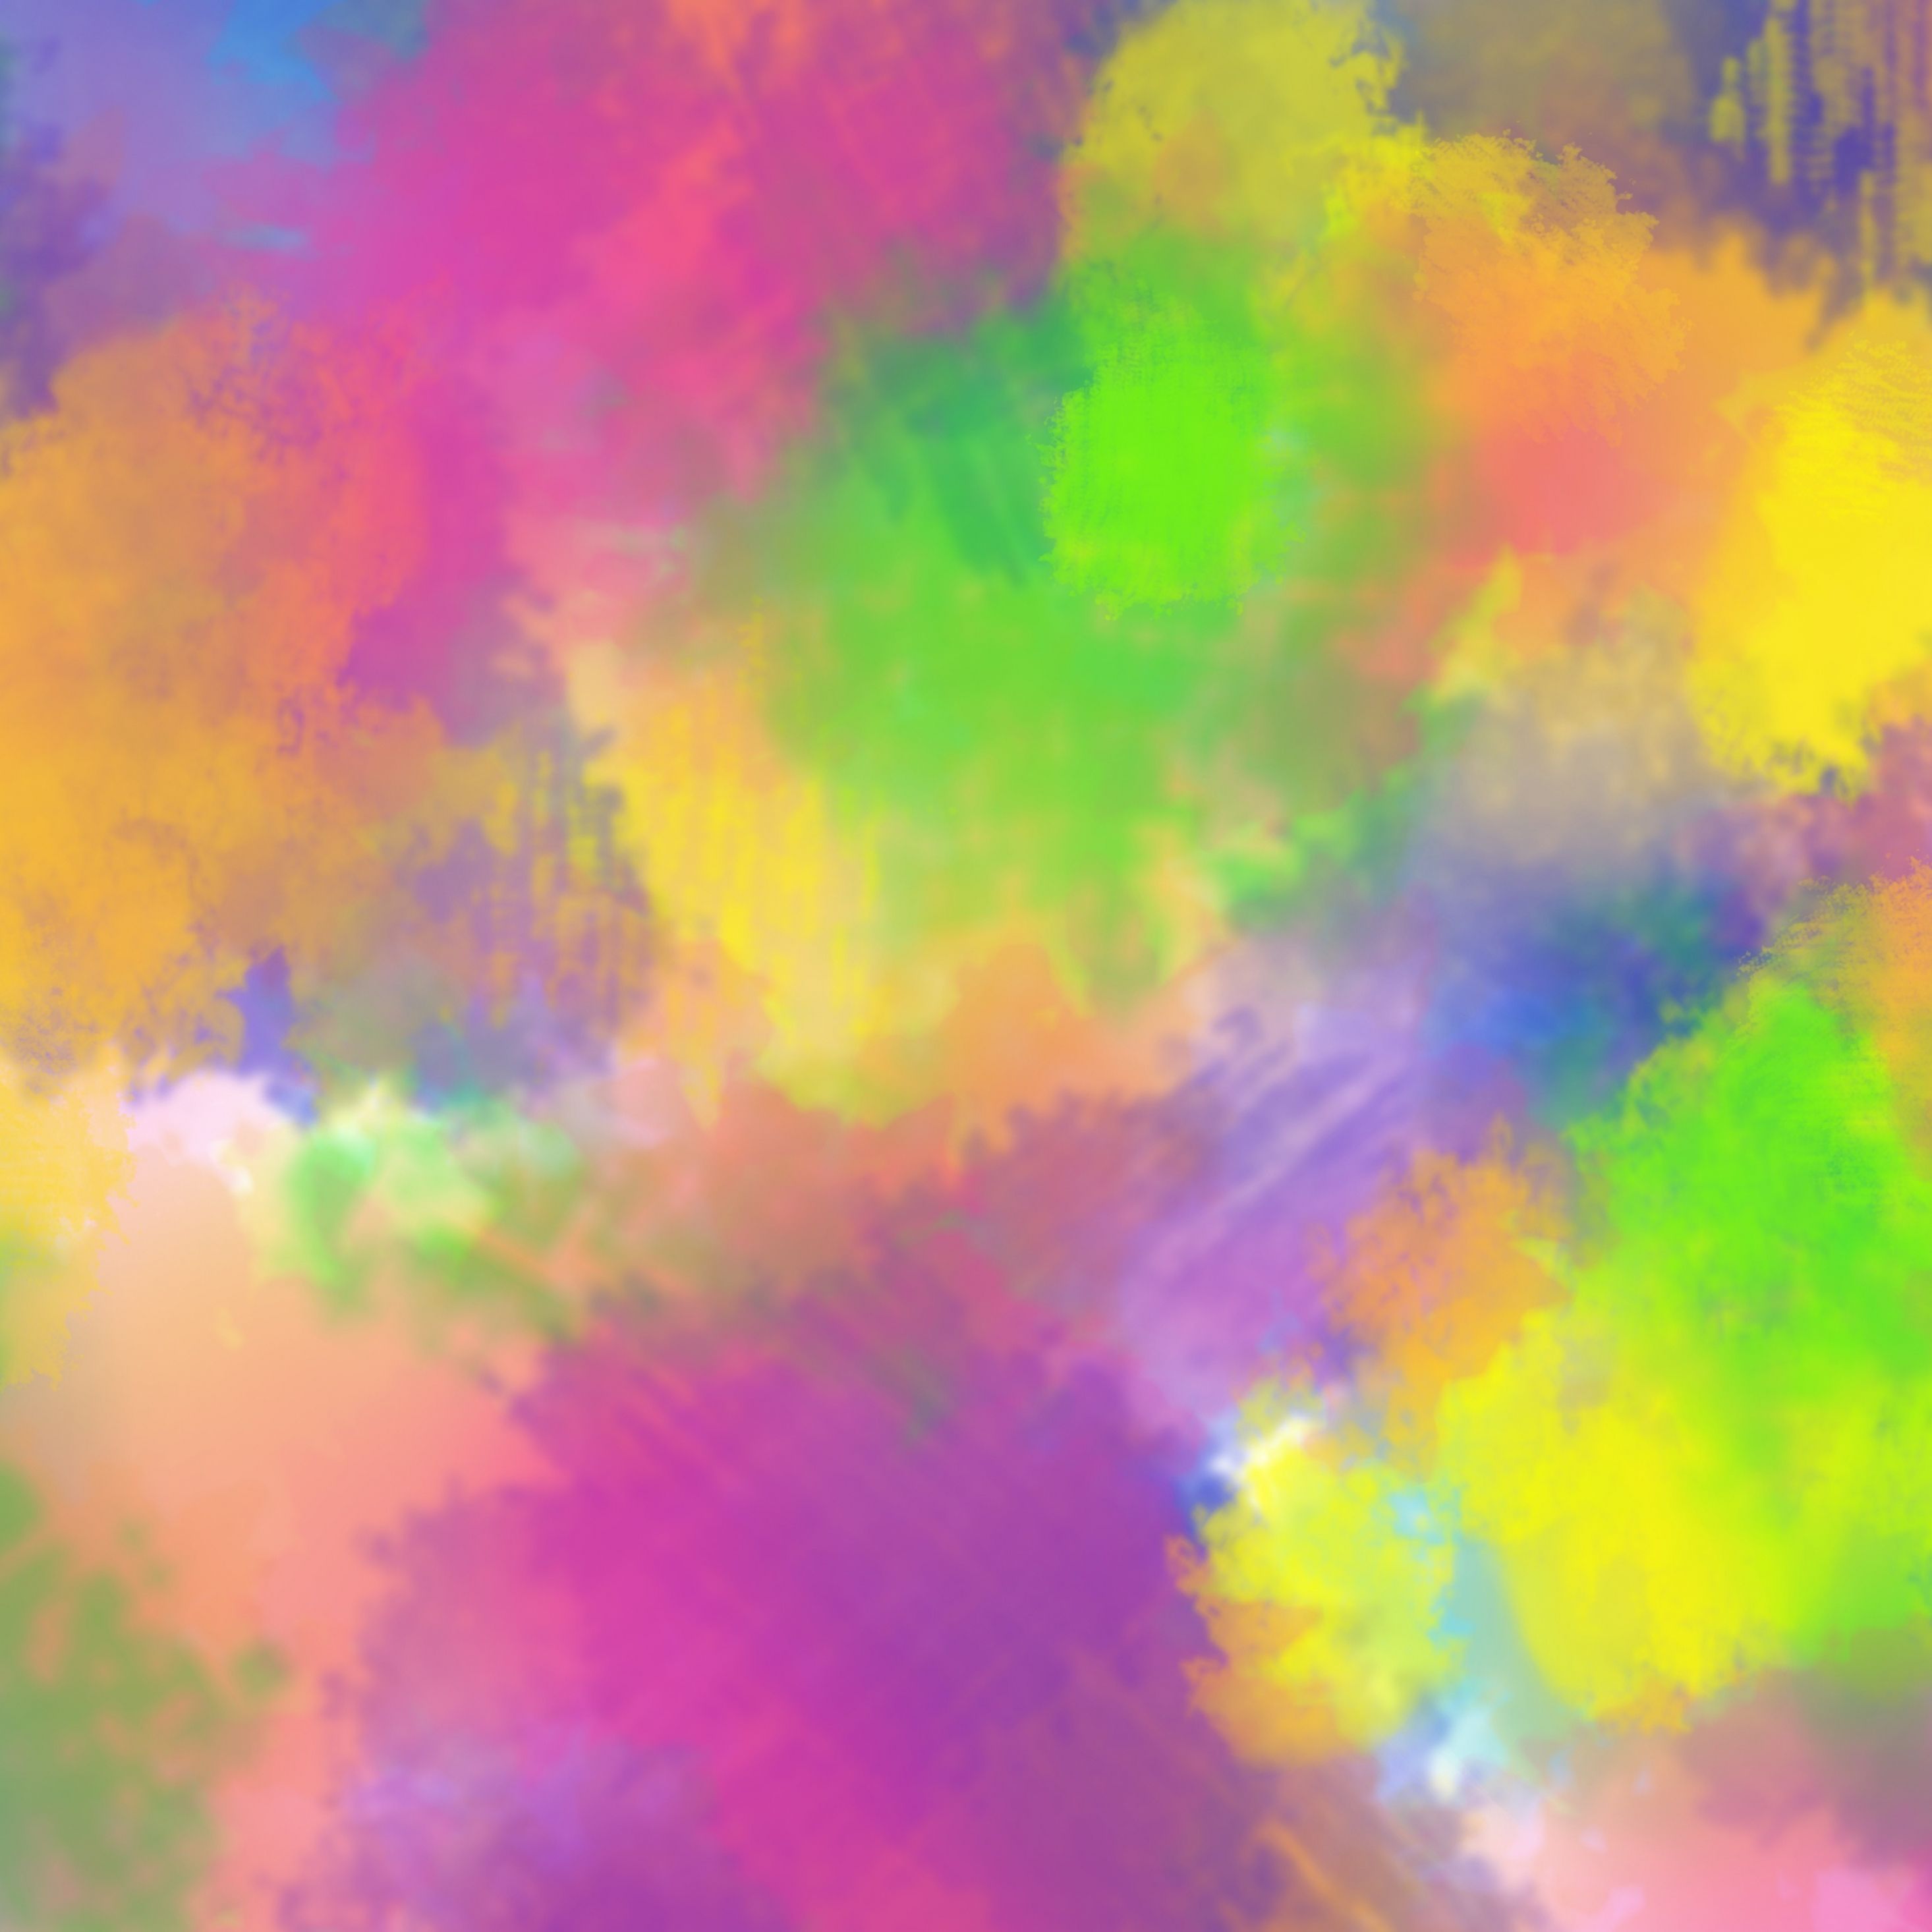 Download 2932x2932 wallpaper blur, abstract, colorful, spatters, ipad pro retina, 2932x2932 HD image, background, 3213